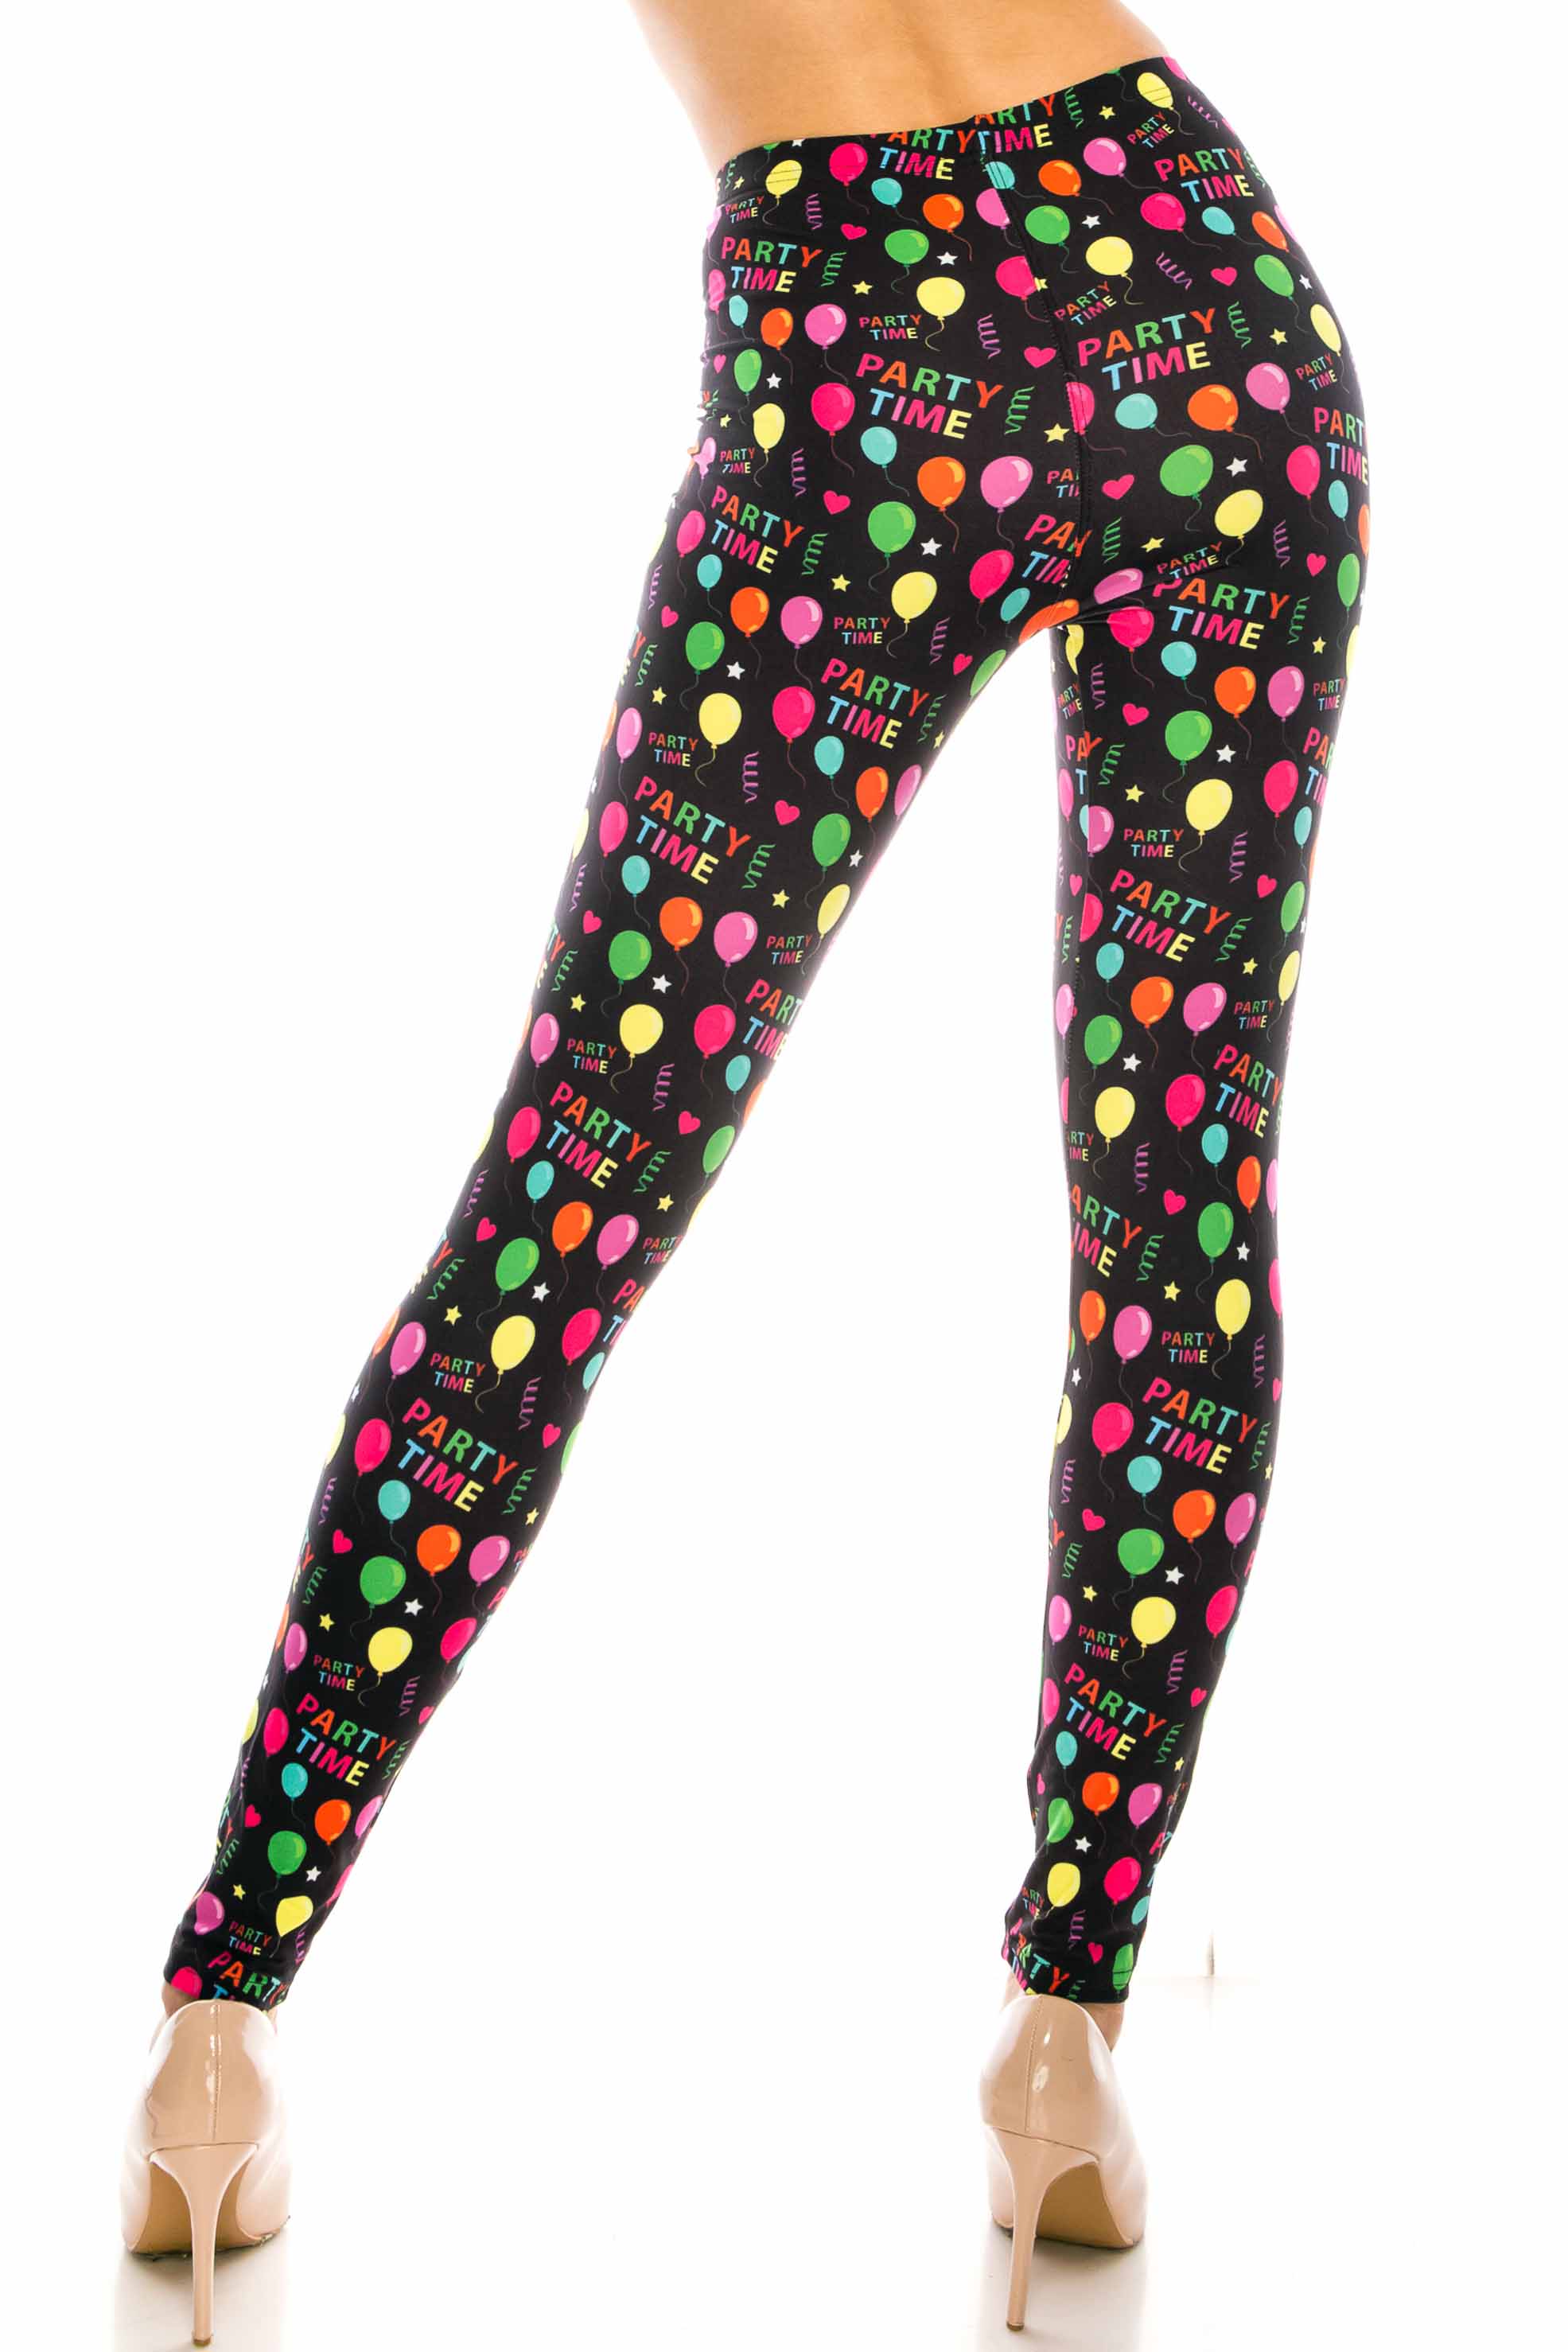 Wholesale Creamy Soft Party Time Leggings